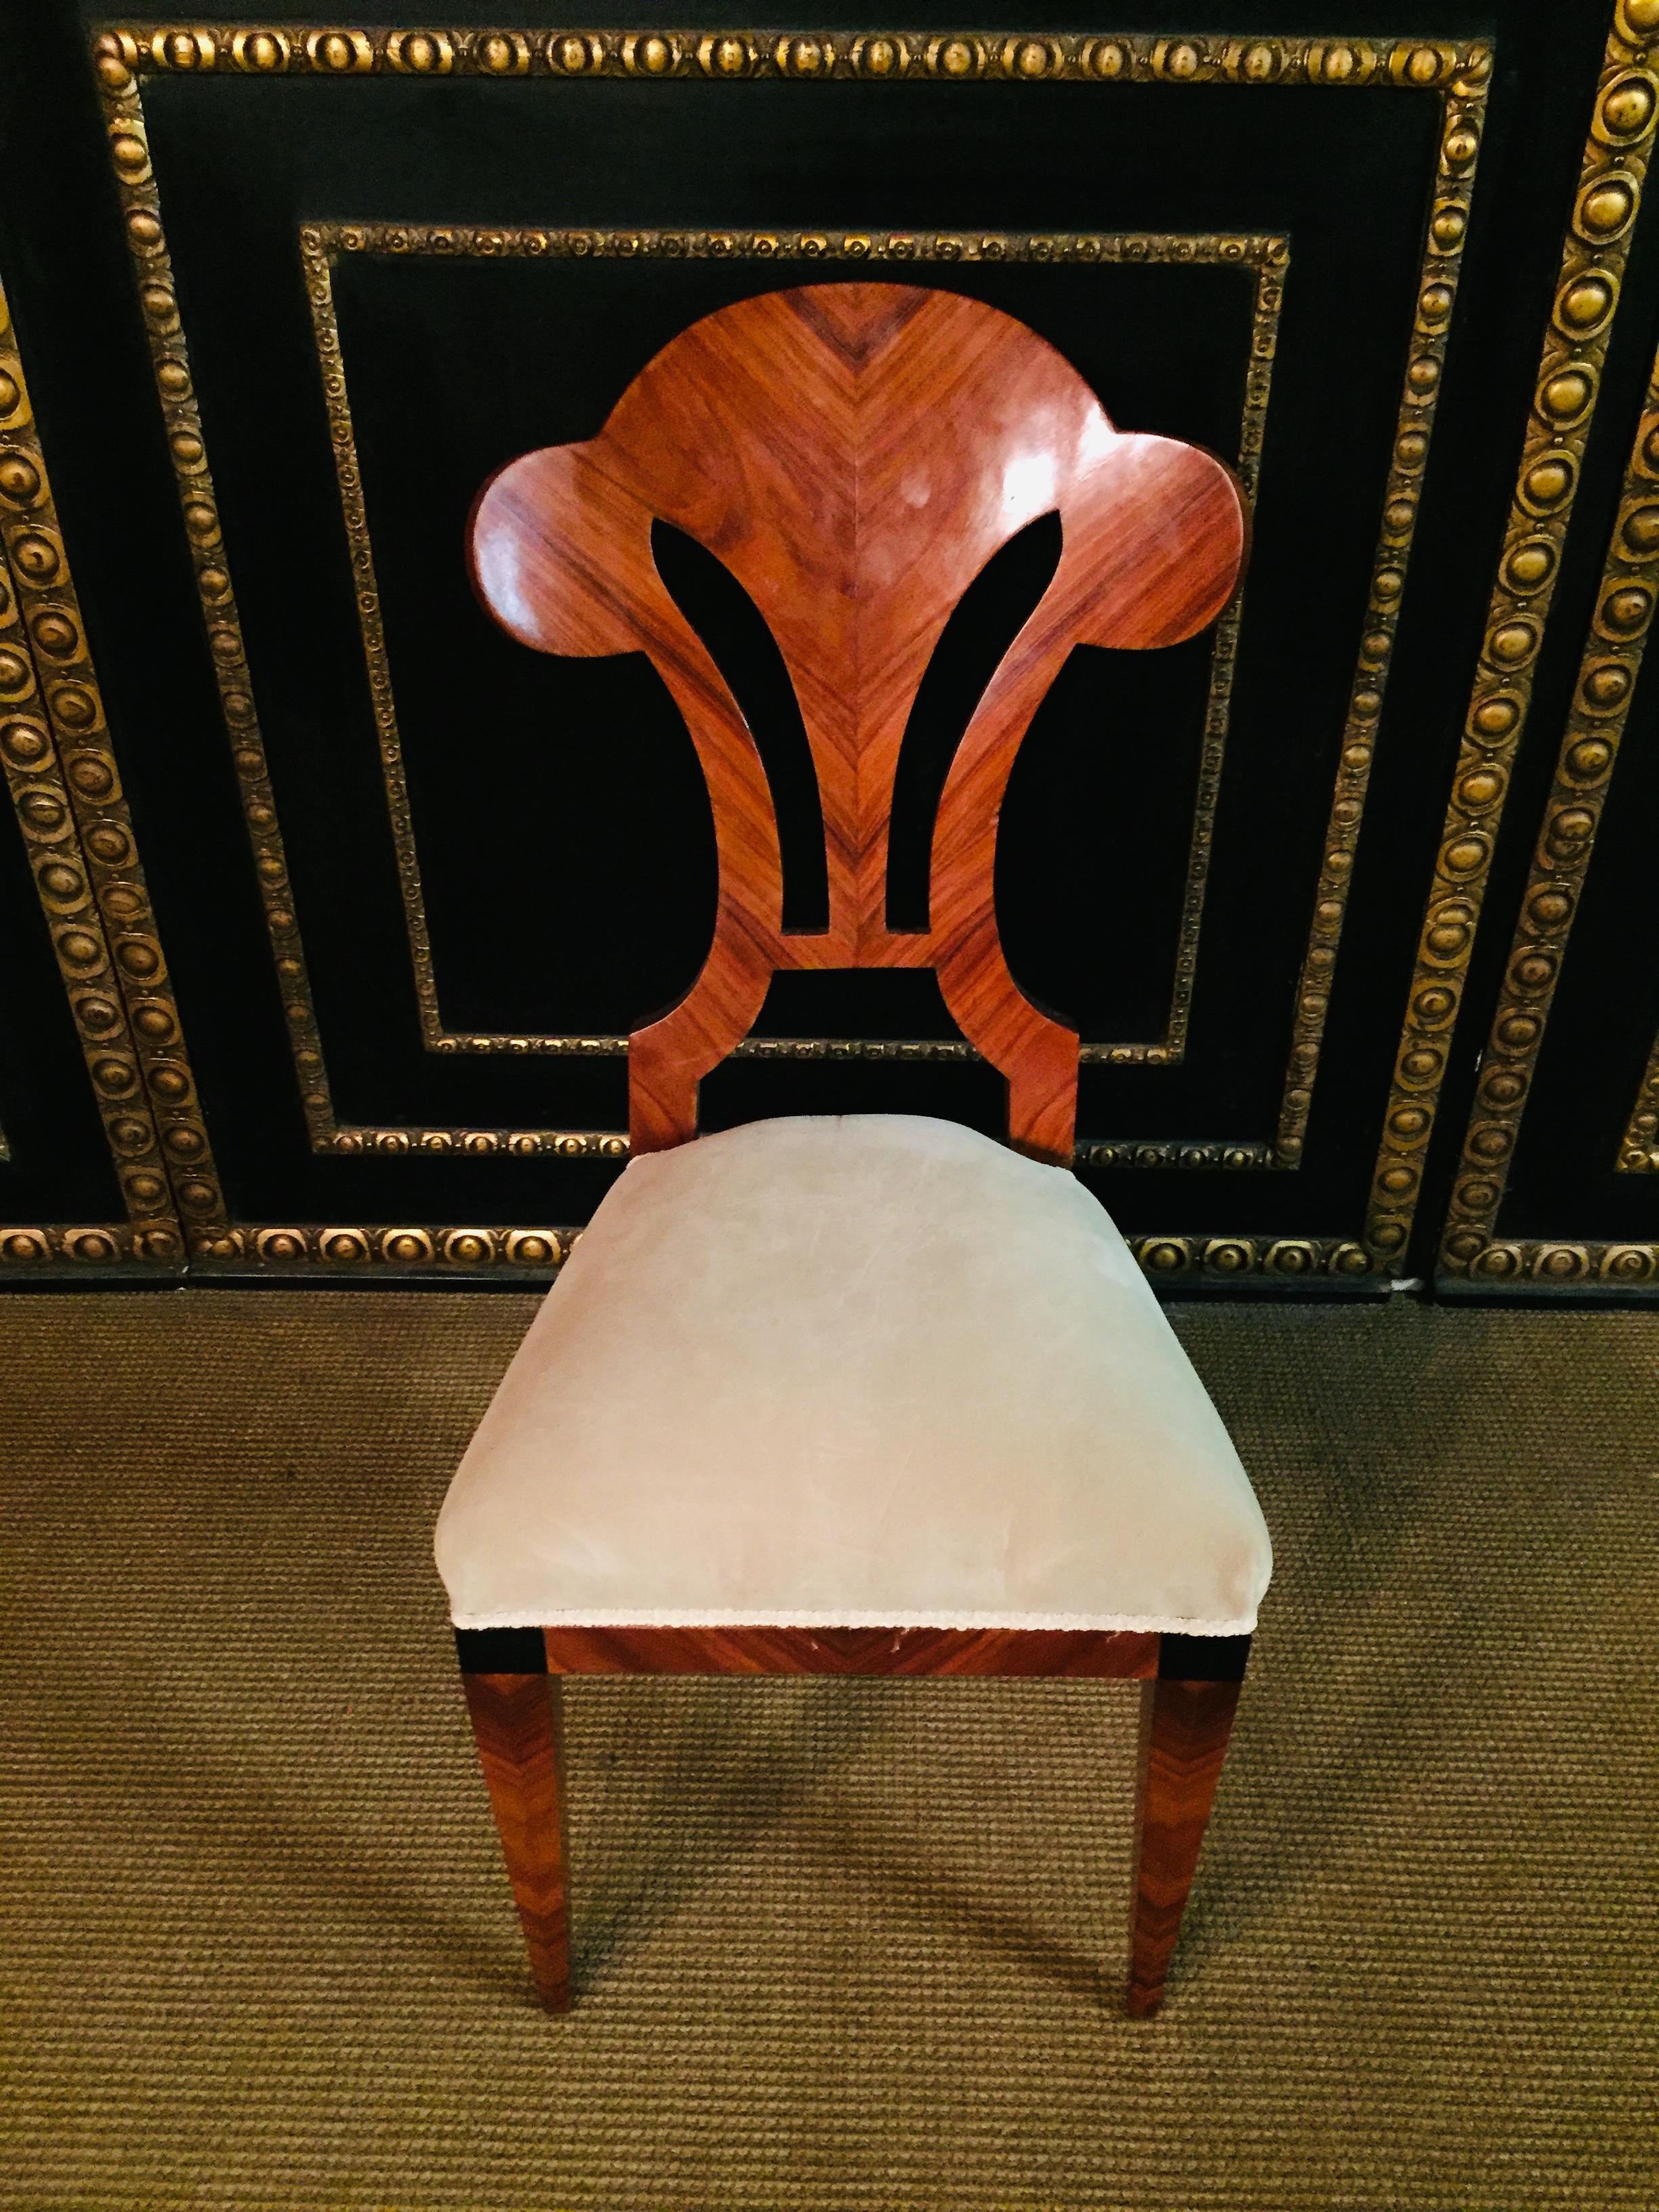 Solid beechwood with mahogany veneer. Tapered square legs. Straight frame. Extraordinary backrest, the shape of the backrest could be described as a three-leaf clover. Connected by a straight central bridge. Classically upholstered seat,
 